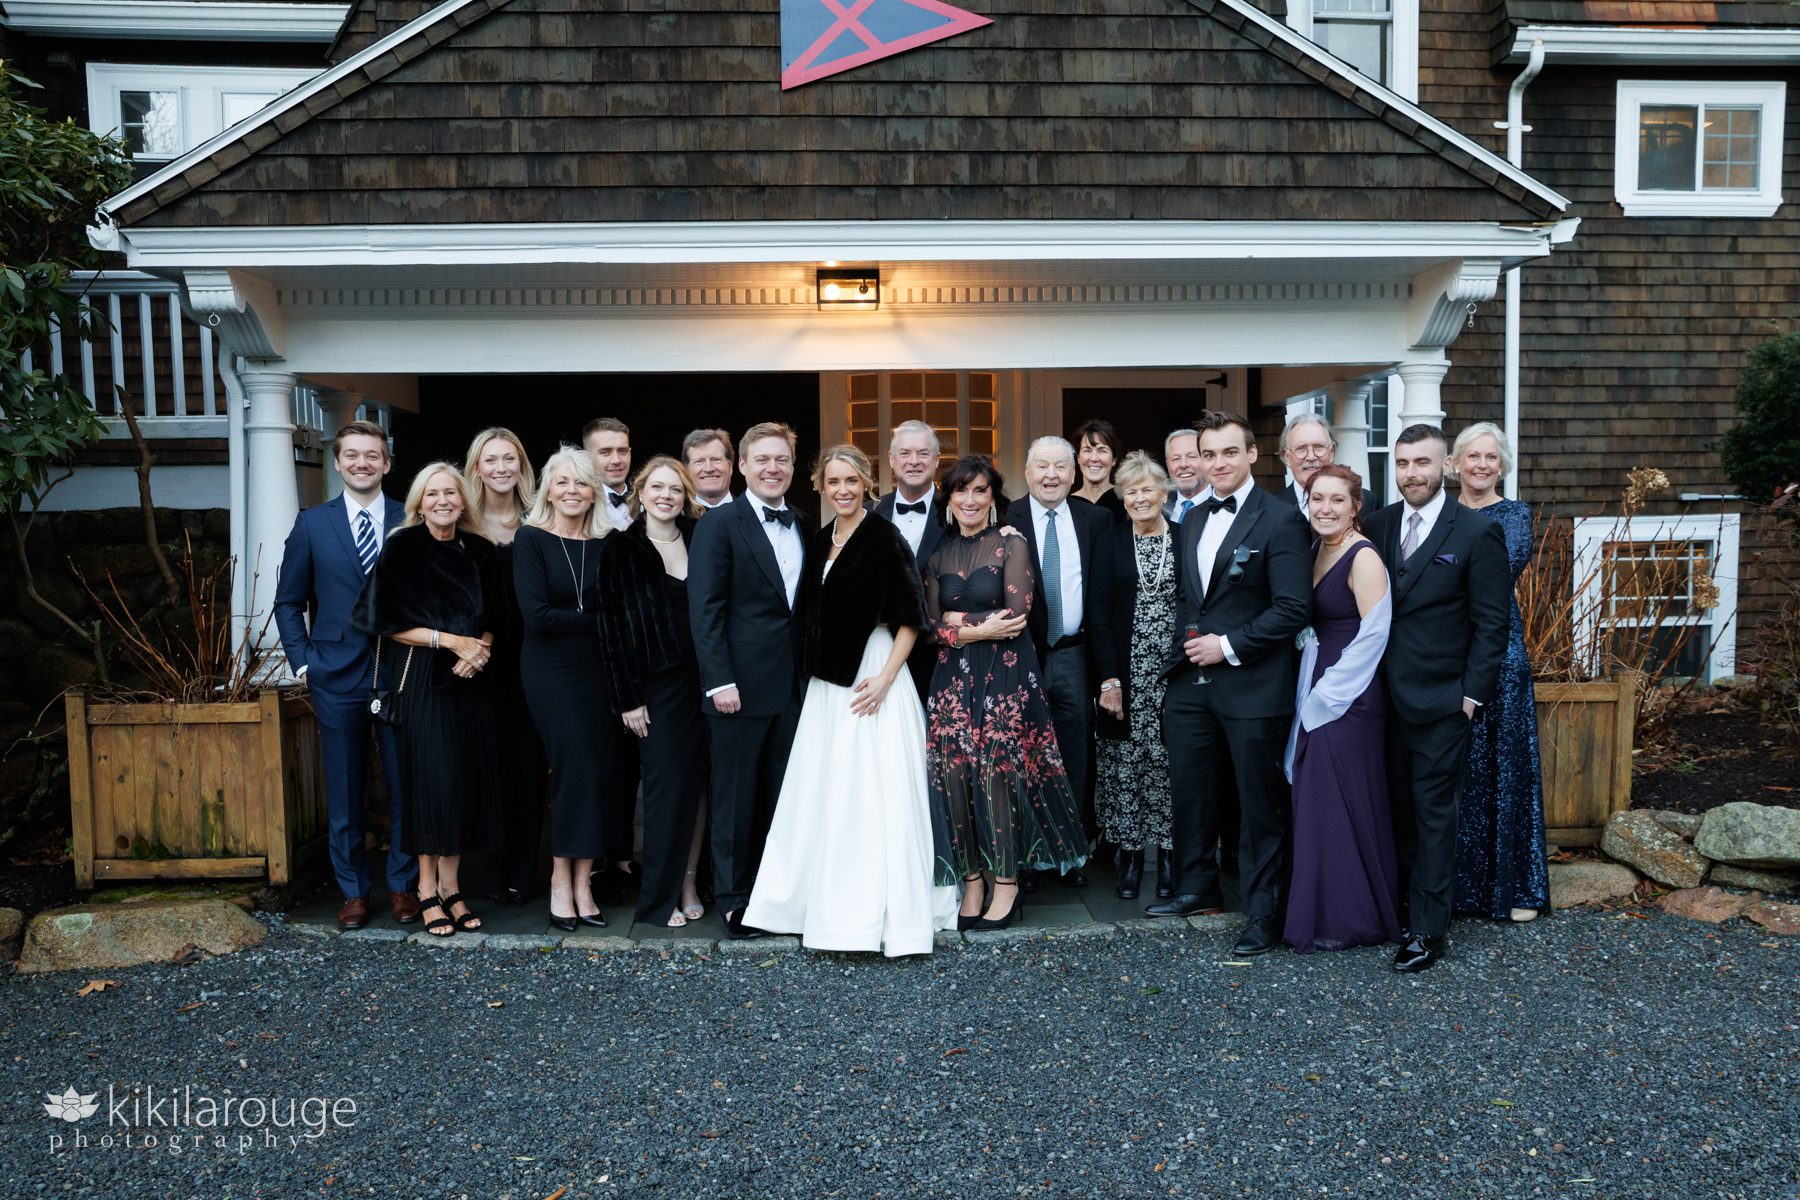 Formal group portrait of twenty people celebrating a wedding at Eastern Point Yacht Club Gloucester